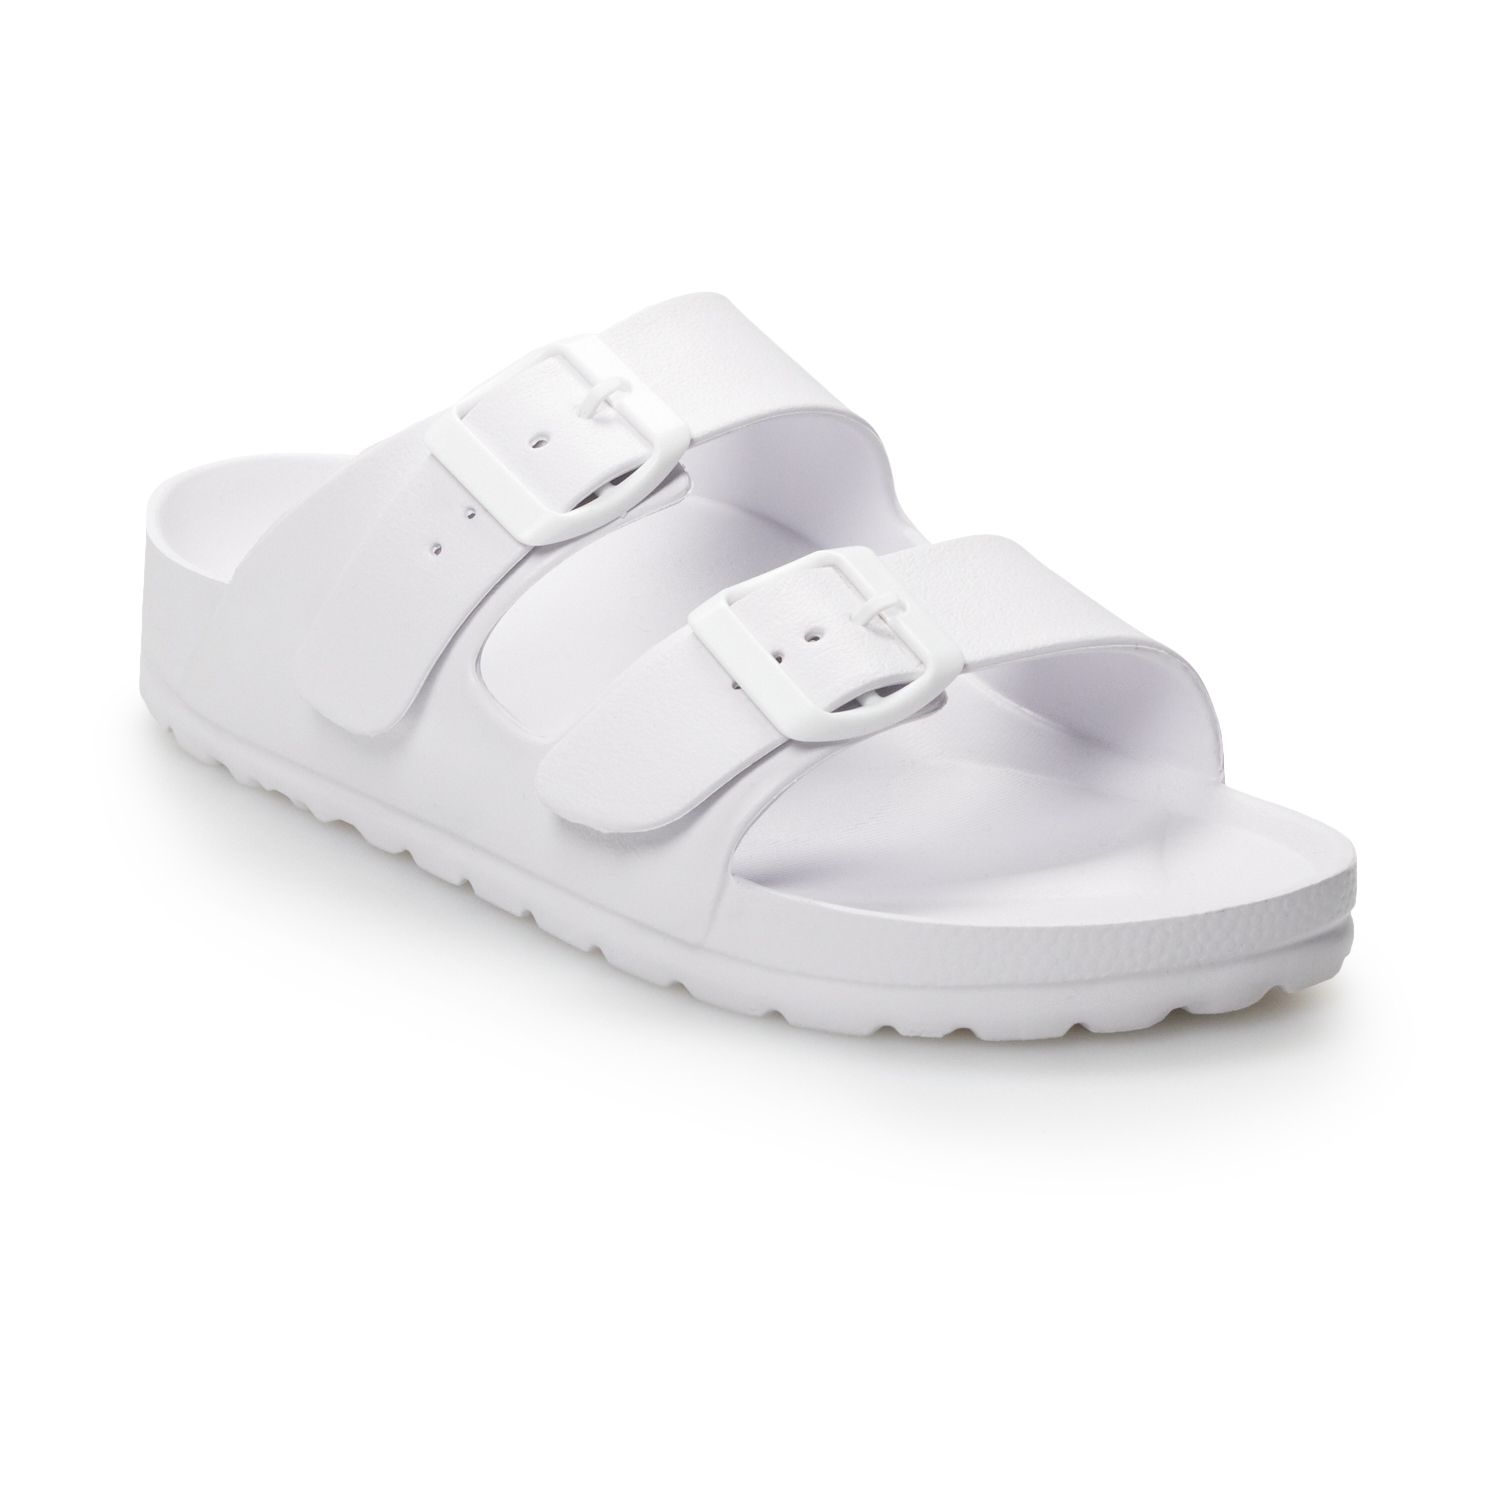 women's footbed sandals